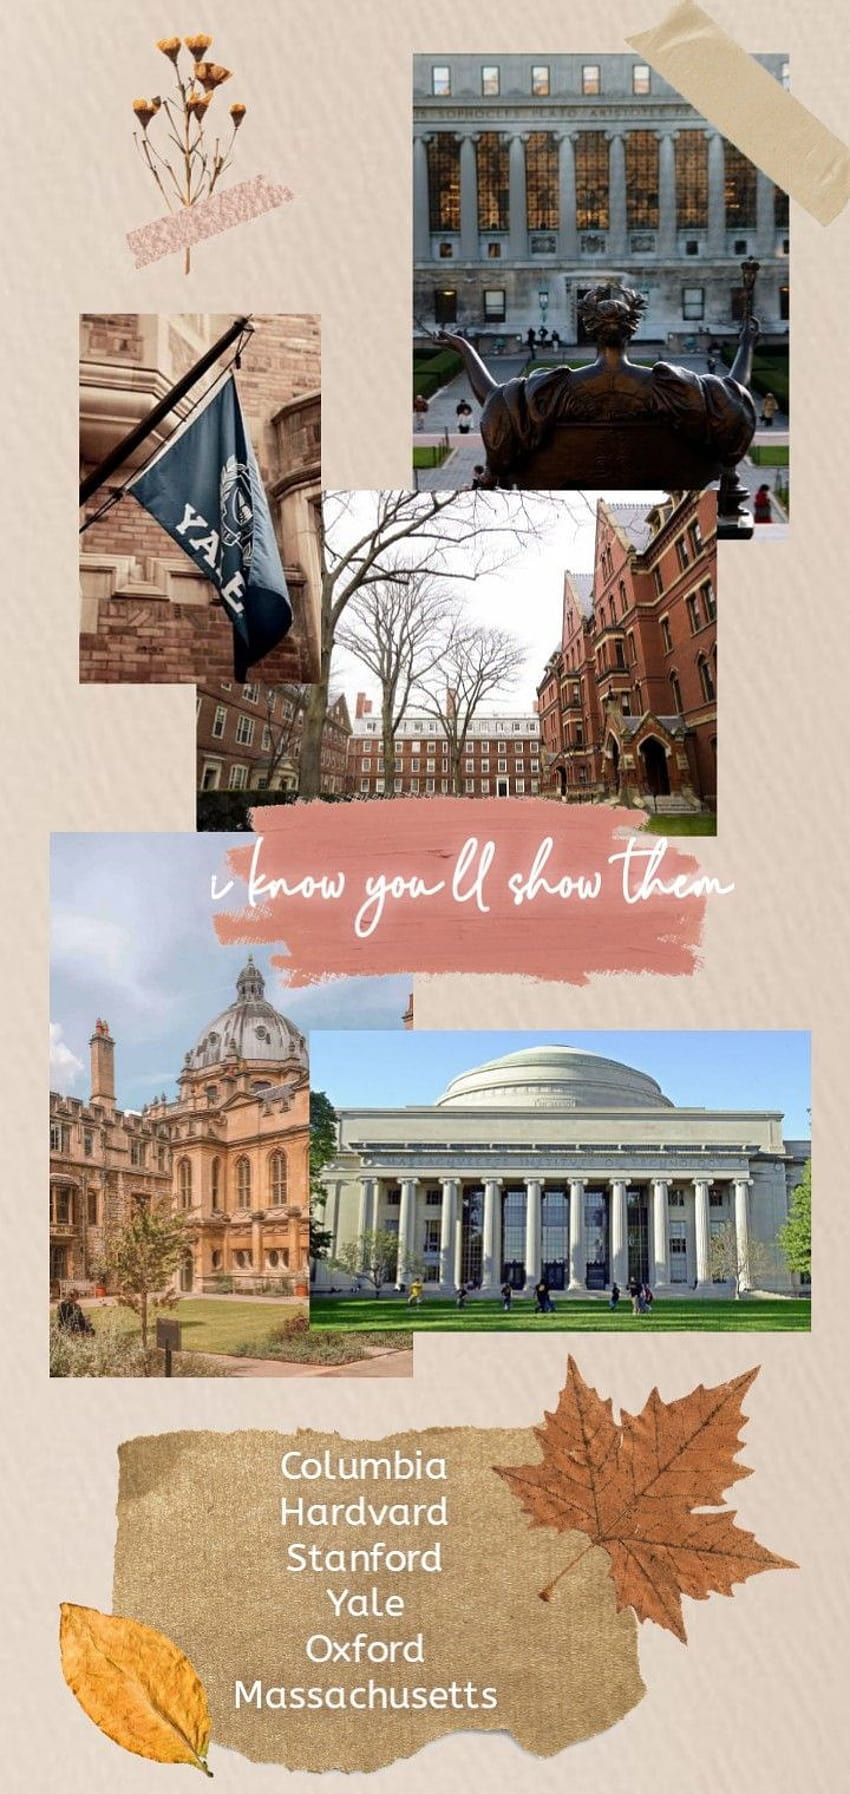 Collage of ivy league colleges with text that says 